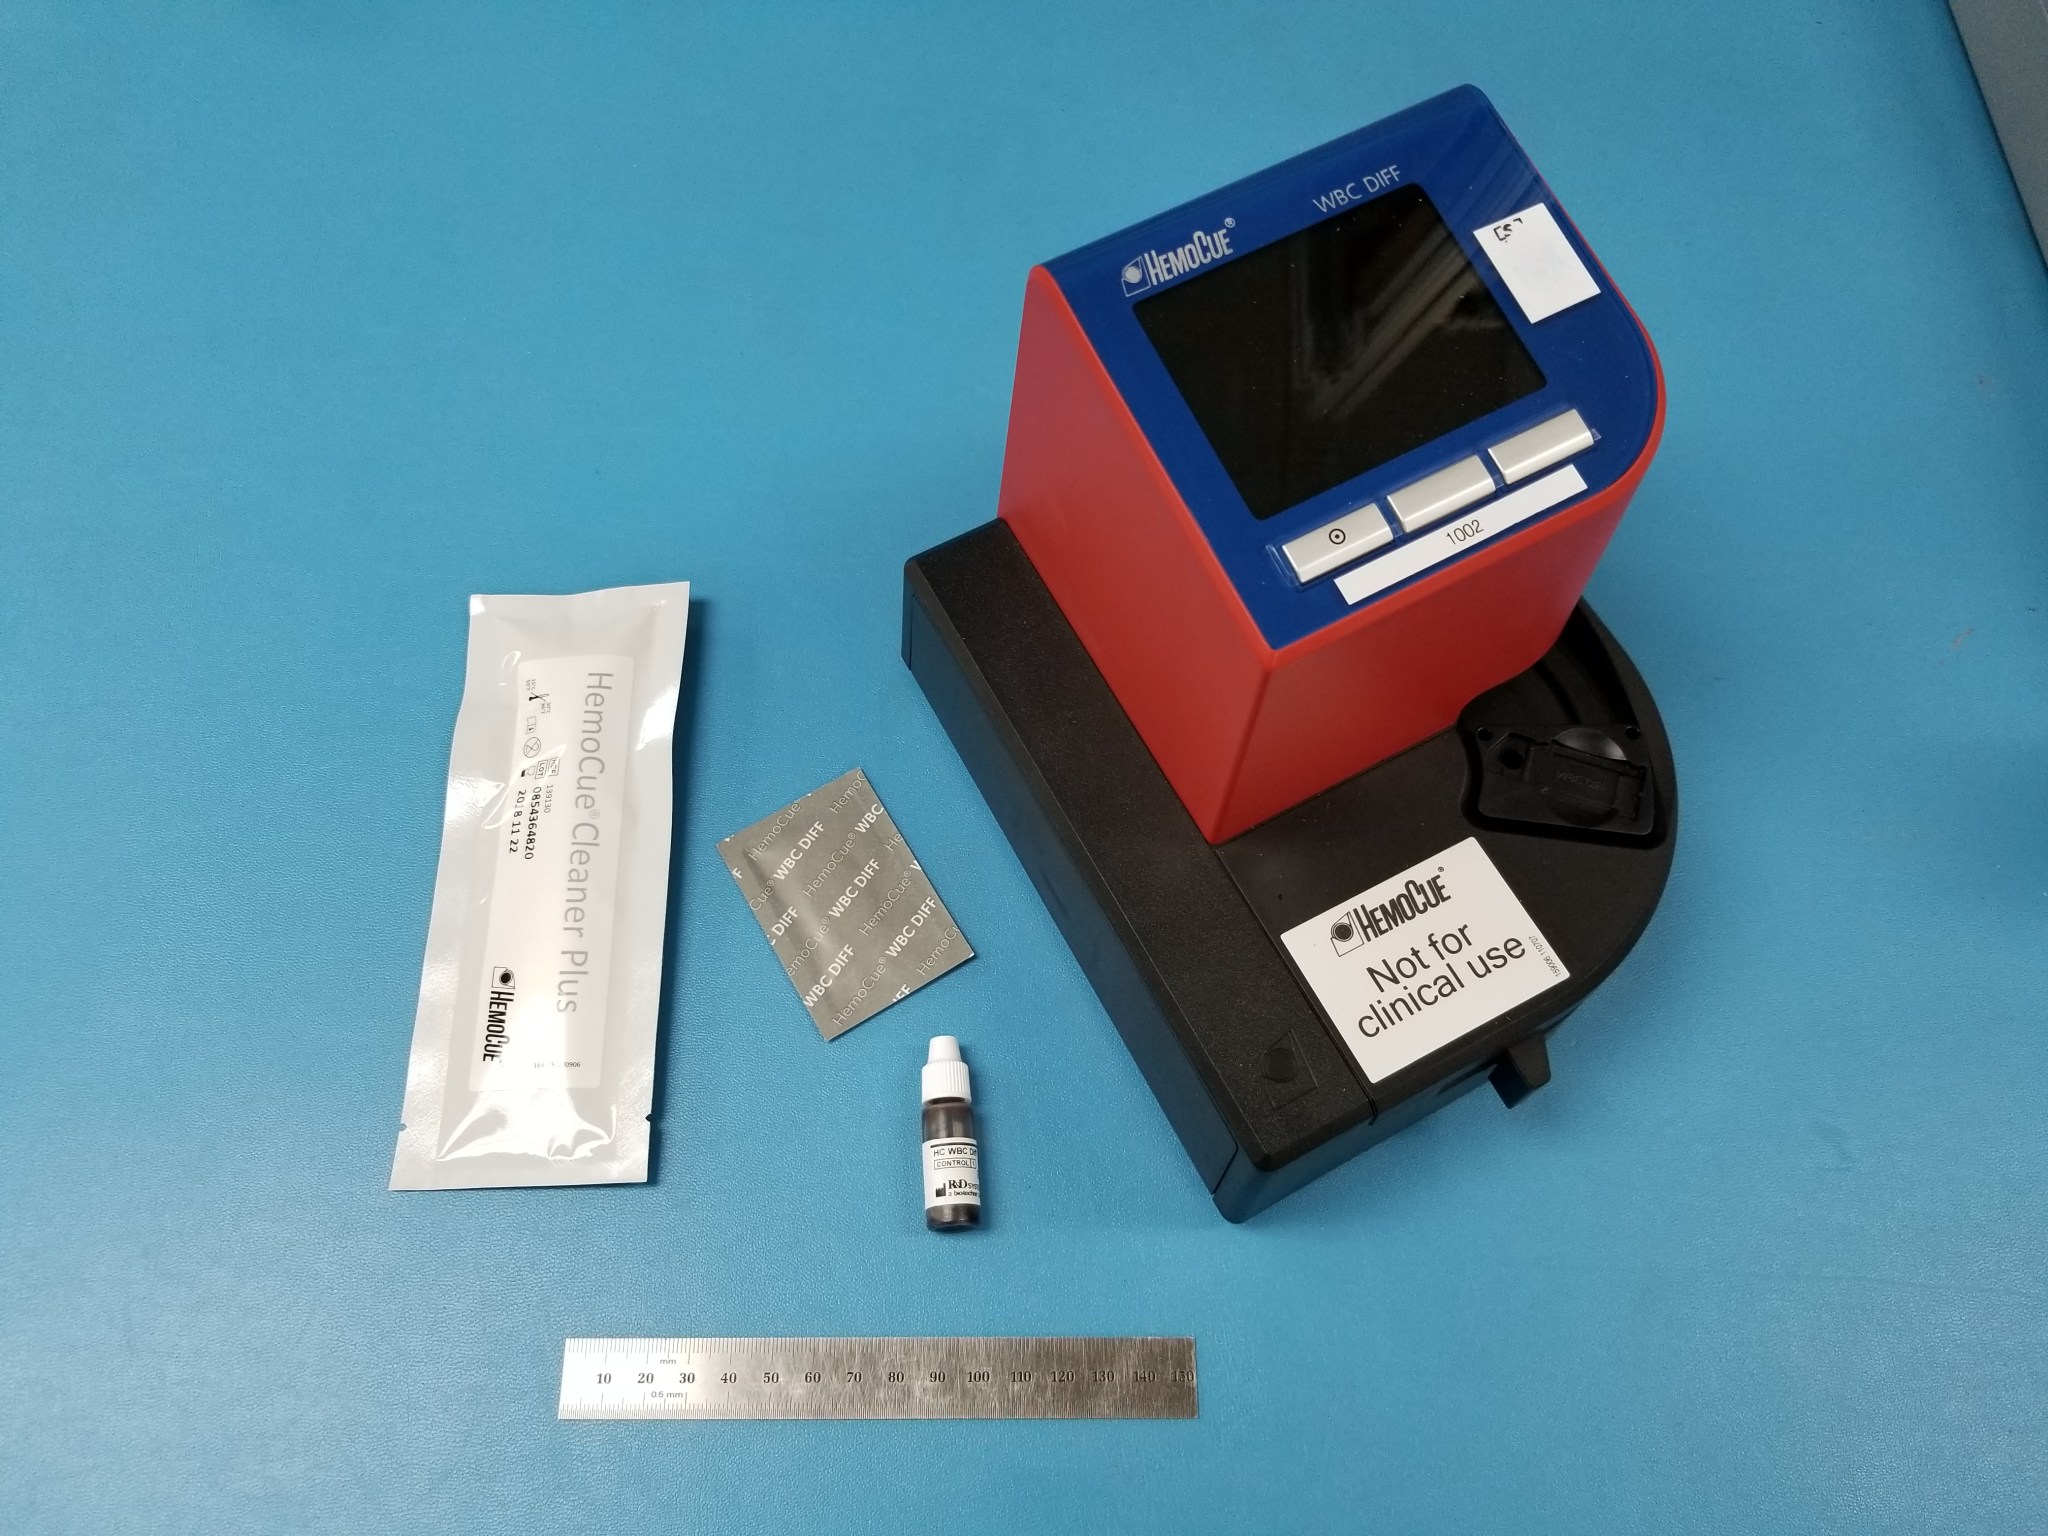 HemoCue white blood cell count analyzer and associated hardware.